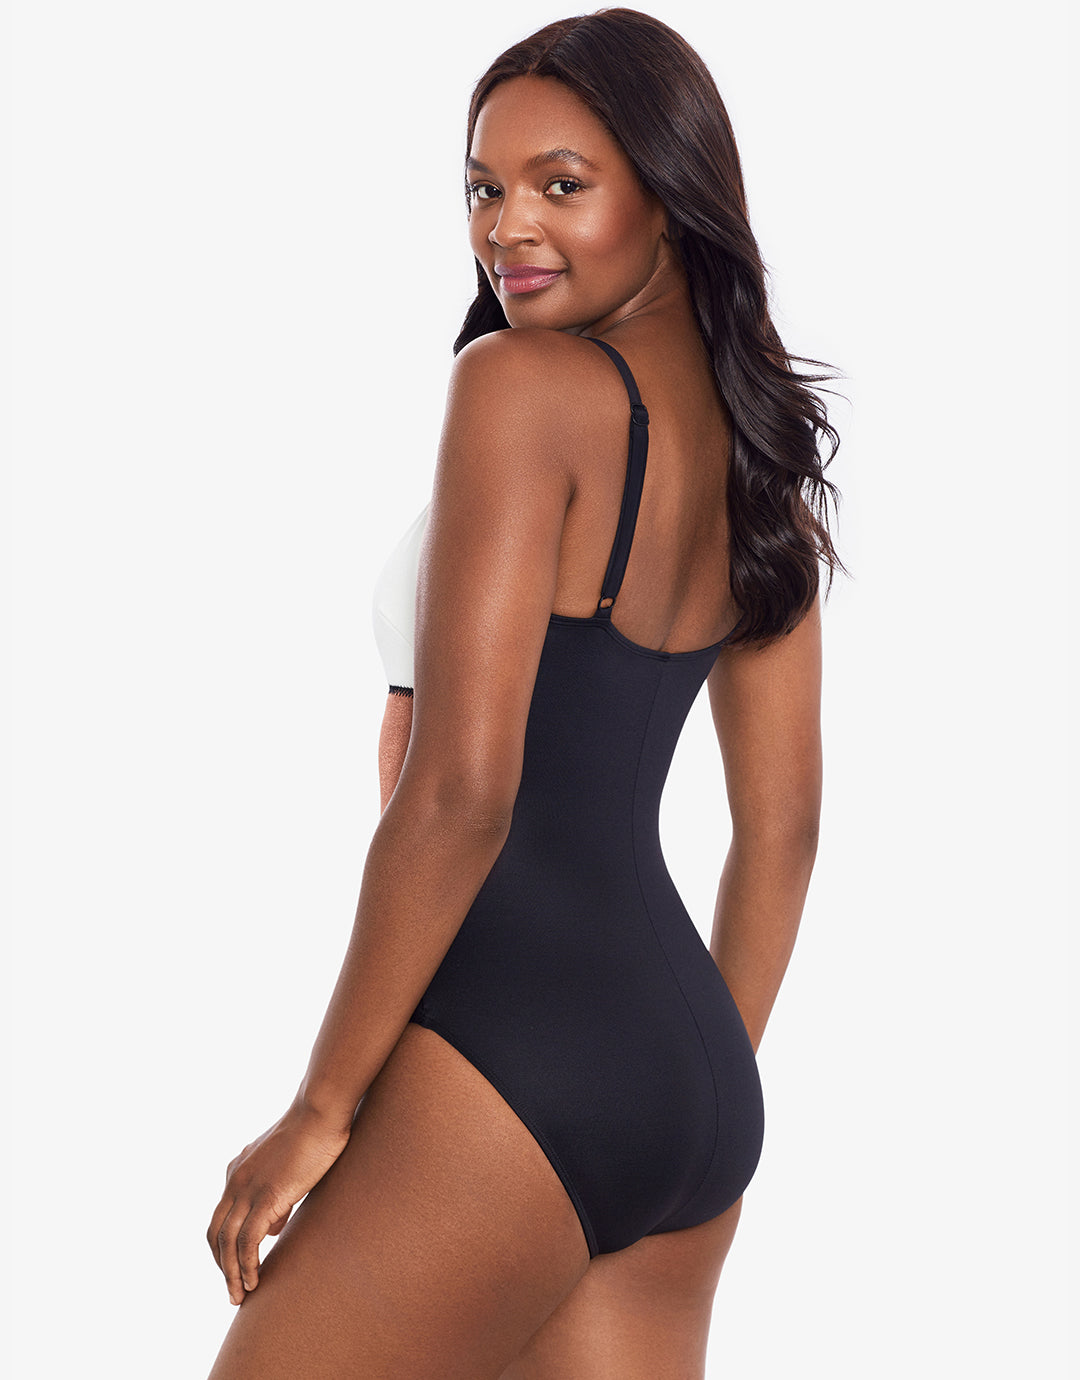 Spectra Trifectra Swimsuit - Simply Beach UK